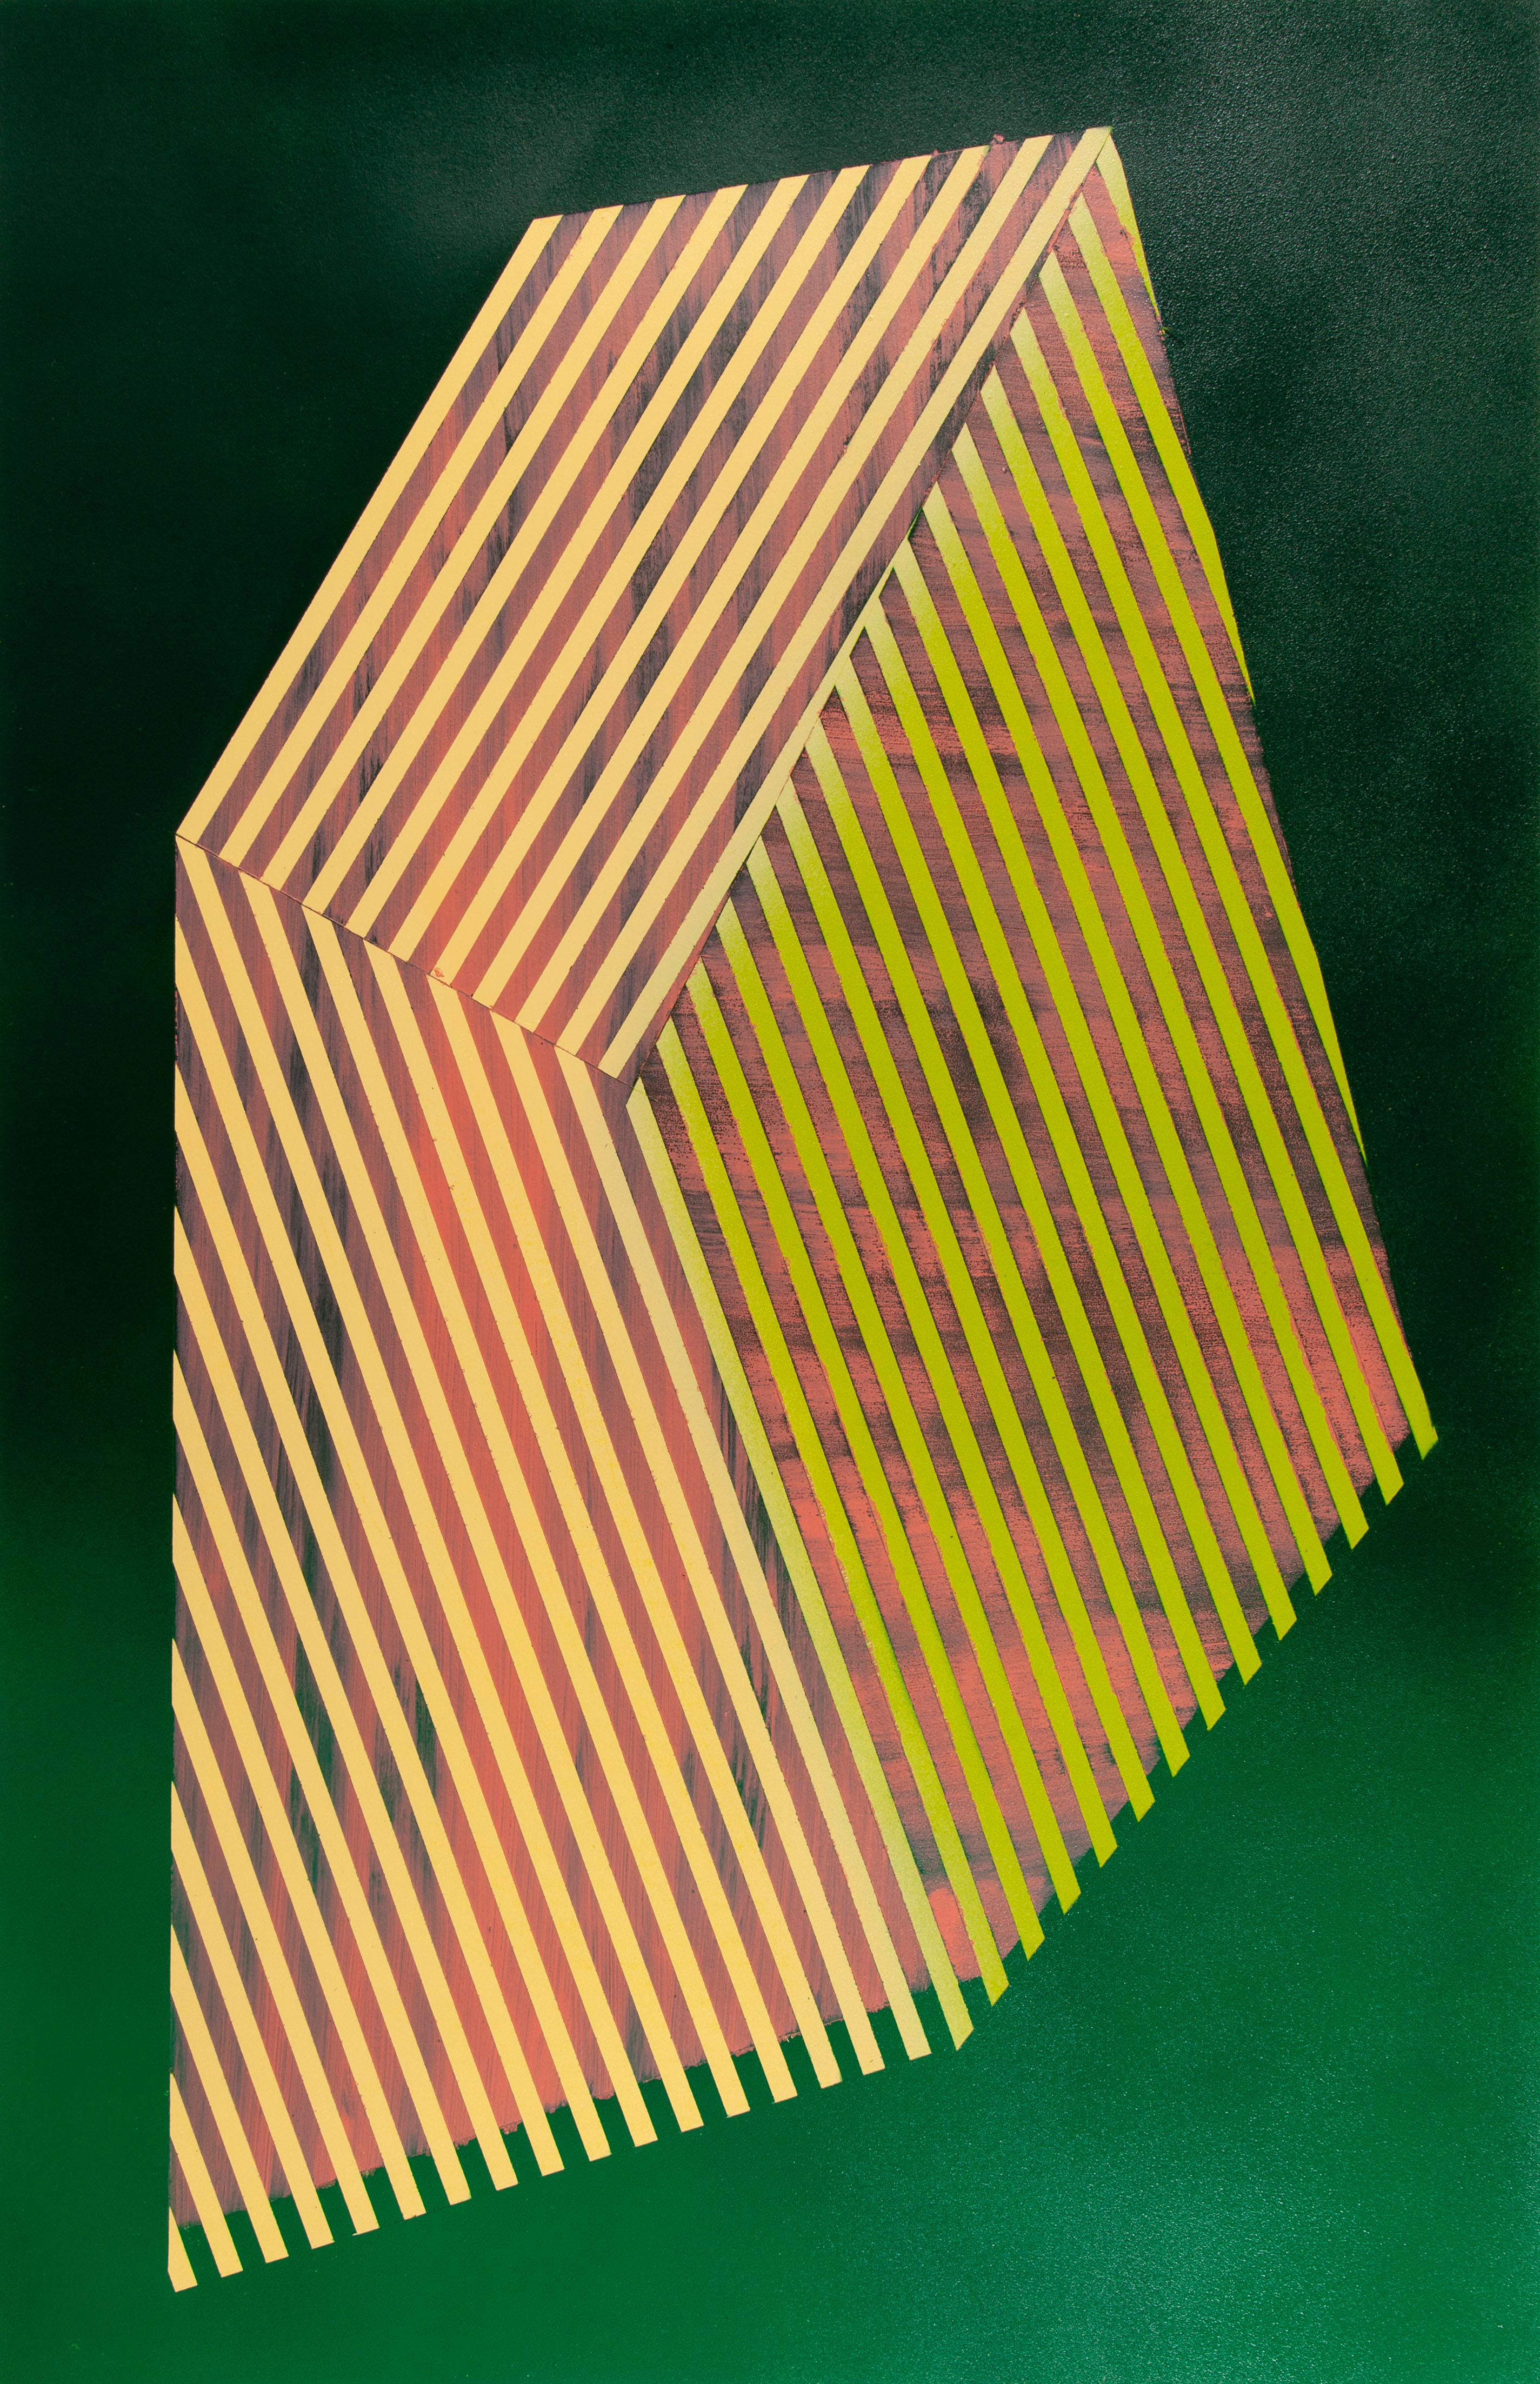 Prismatic Polygon XIX: geometric abstract painting w/ pattern. Gold, green ombre